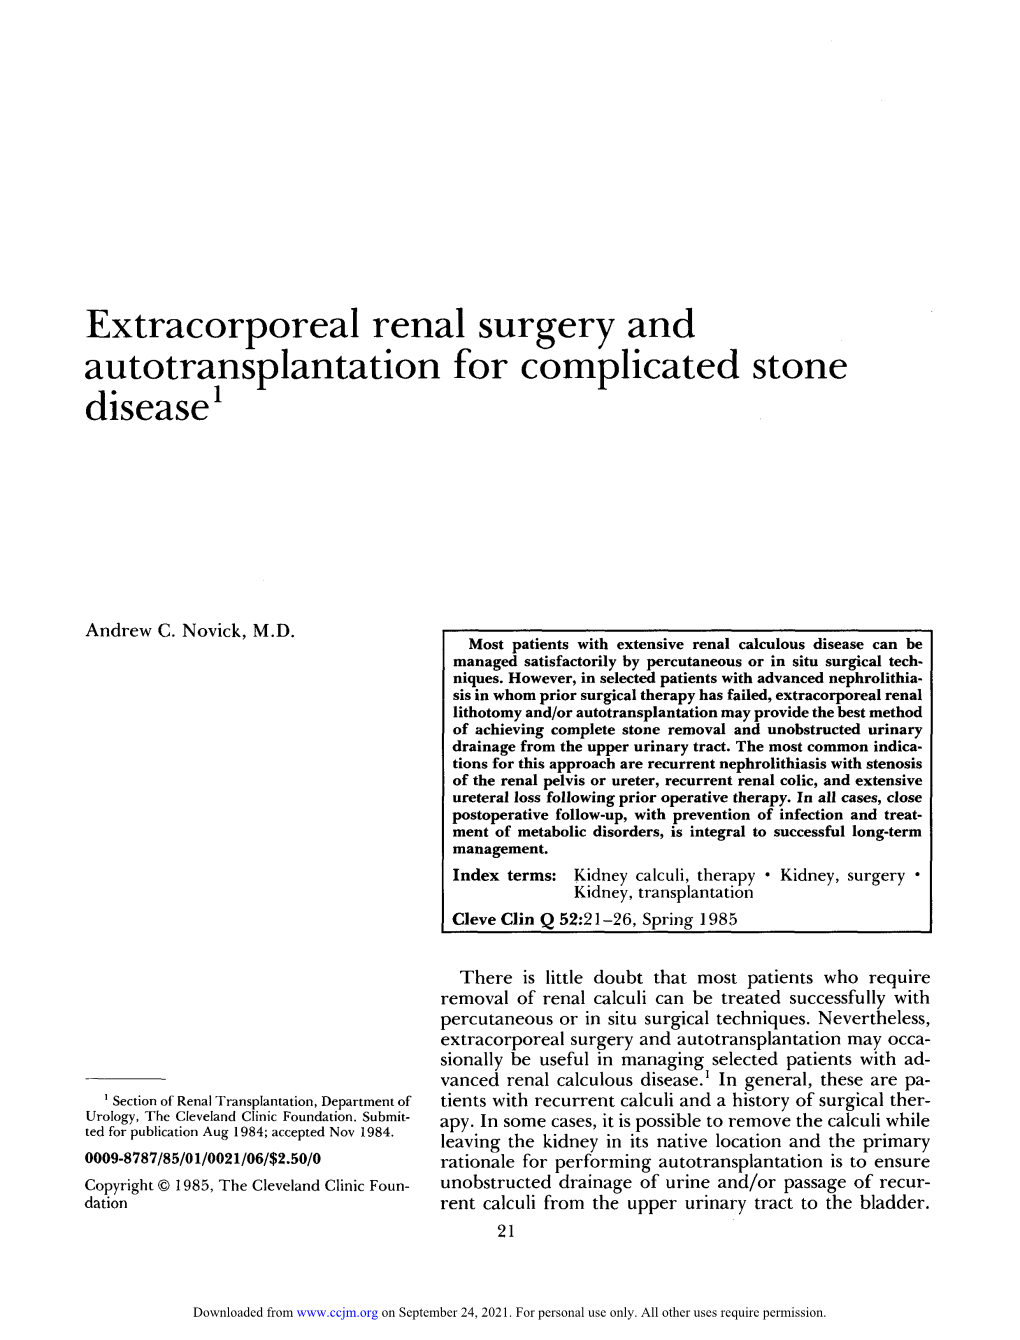 Extracorporeal Renal Surgery and Autotransplantation for Complicated Stone Disease1